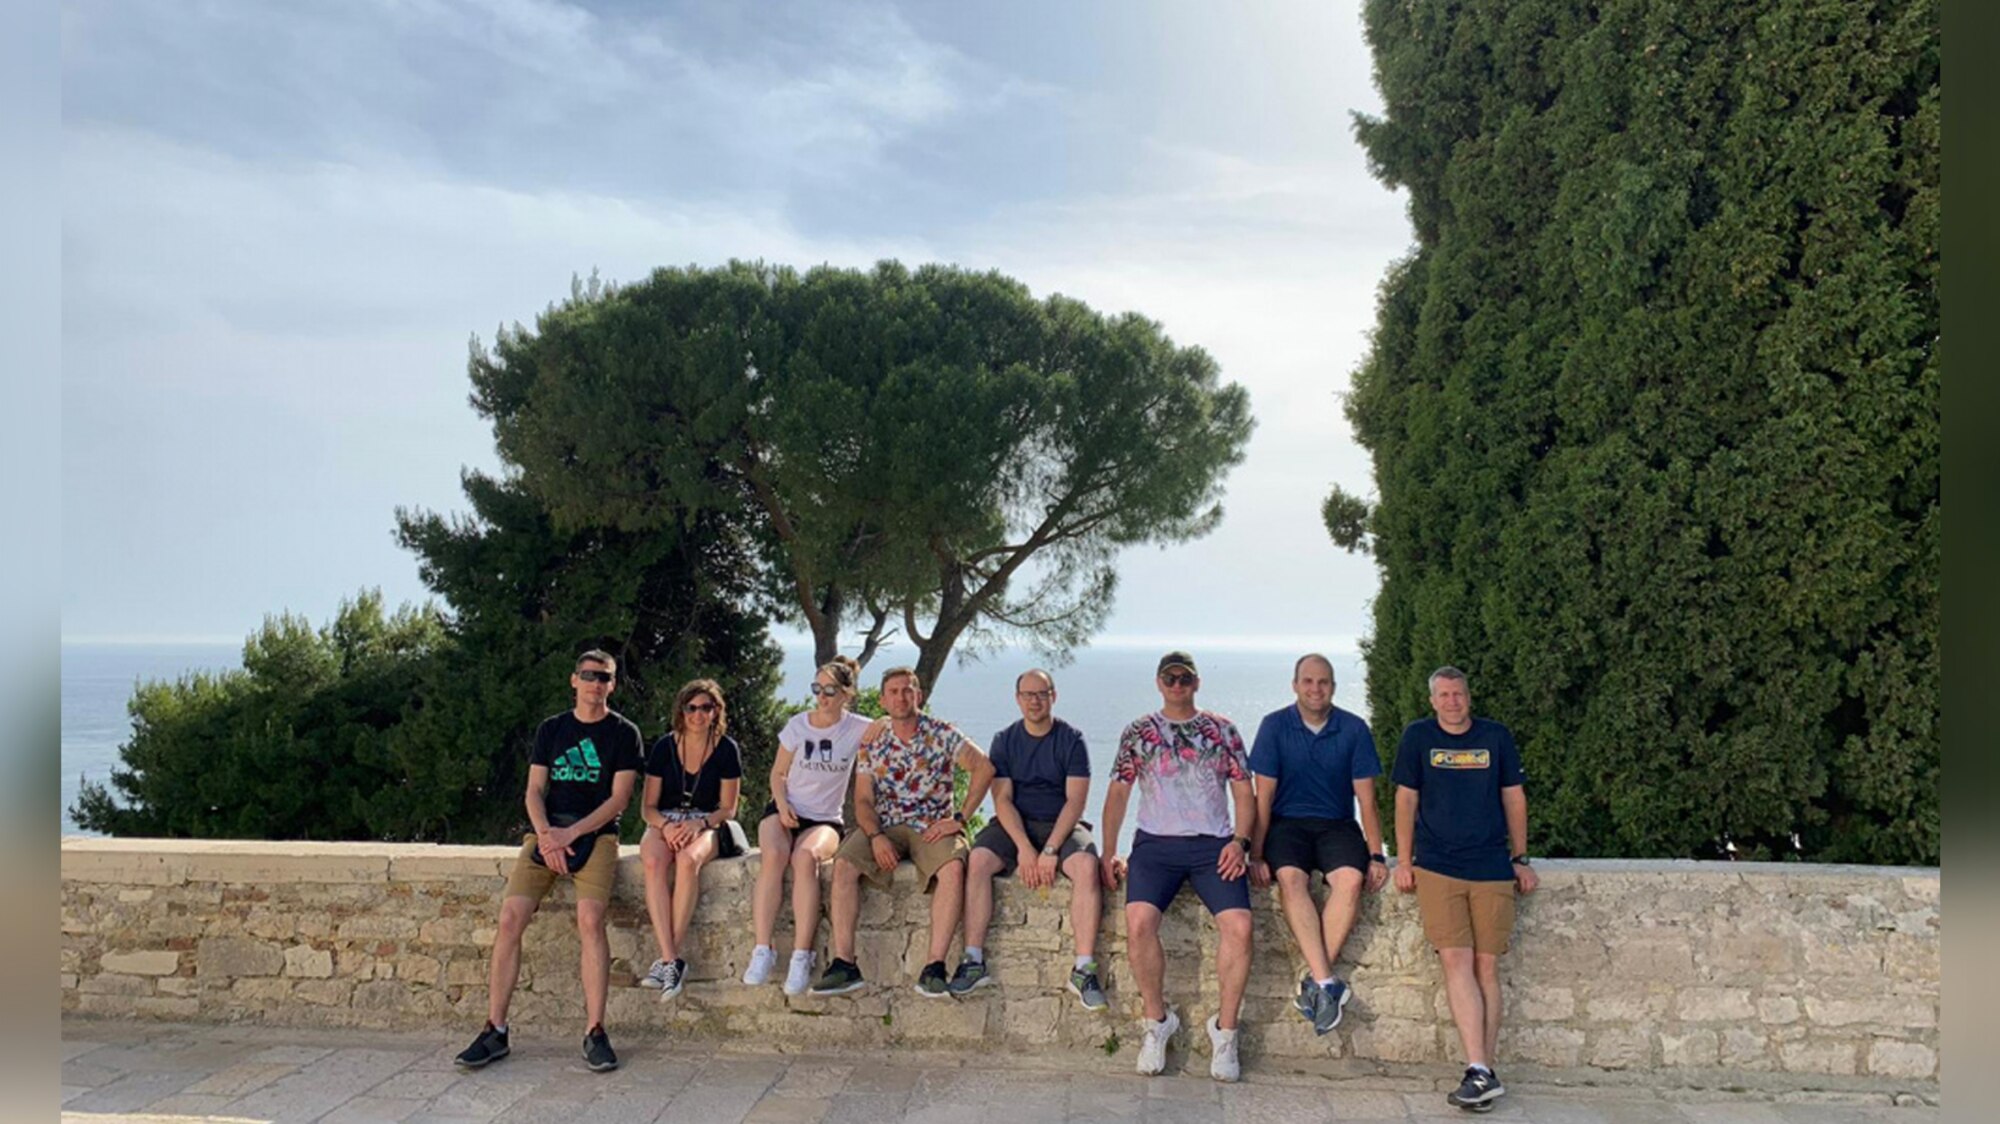 Air Force Staff Sgt. Nikola Bozic (left) visits Pula, Croatia, with a Croatian Area Studies Immersion group May 2019. Bozic participated in this opportunity as a Language Enabled Airman Program scholar to sharpen his Croatian language skills and learn more about the history of the area. (Courtesy photo)